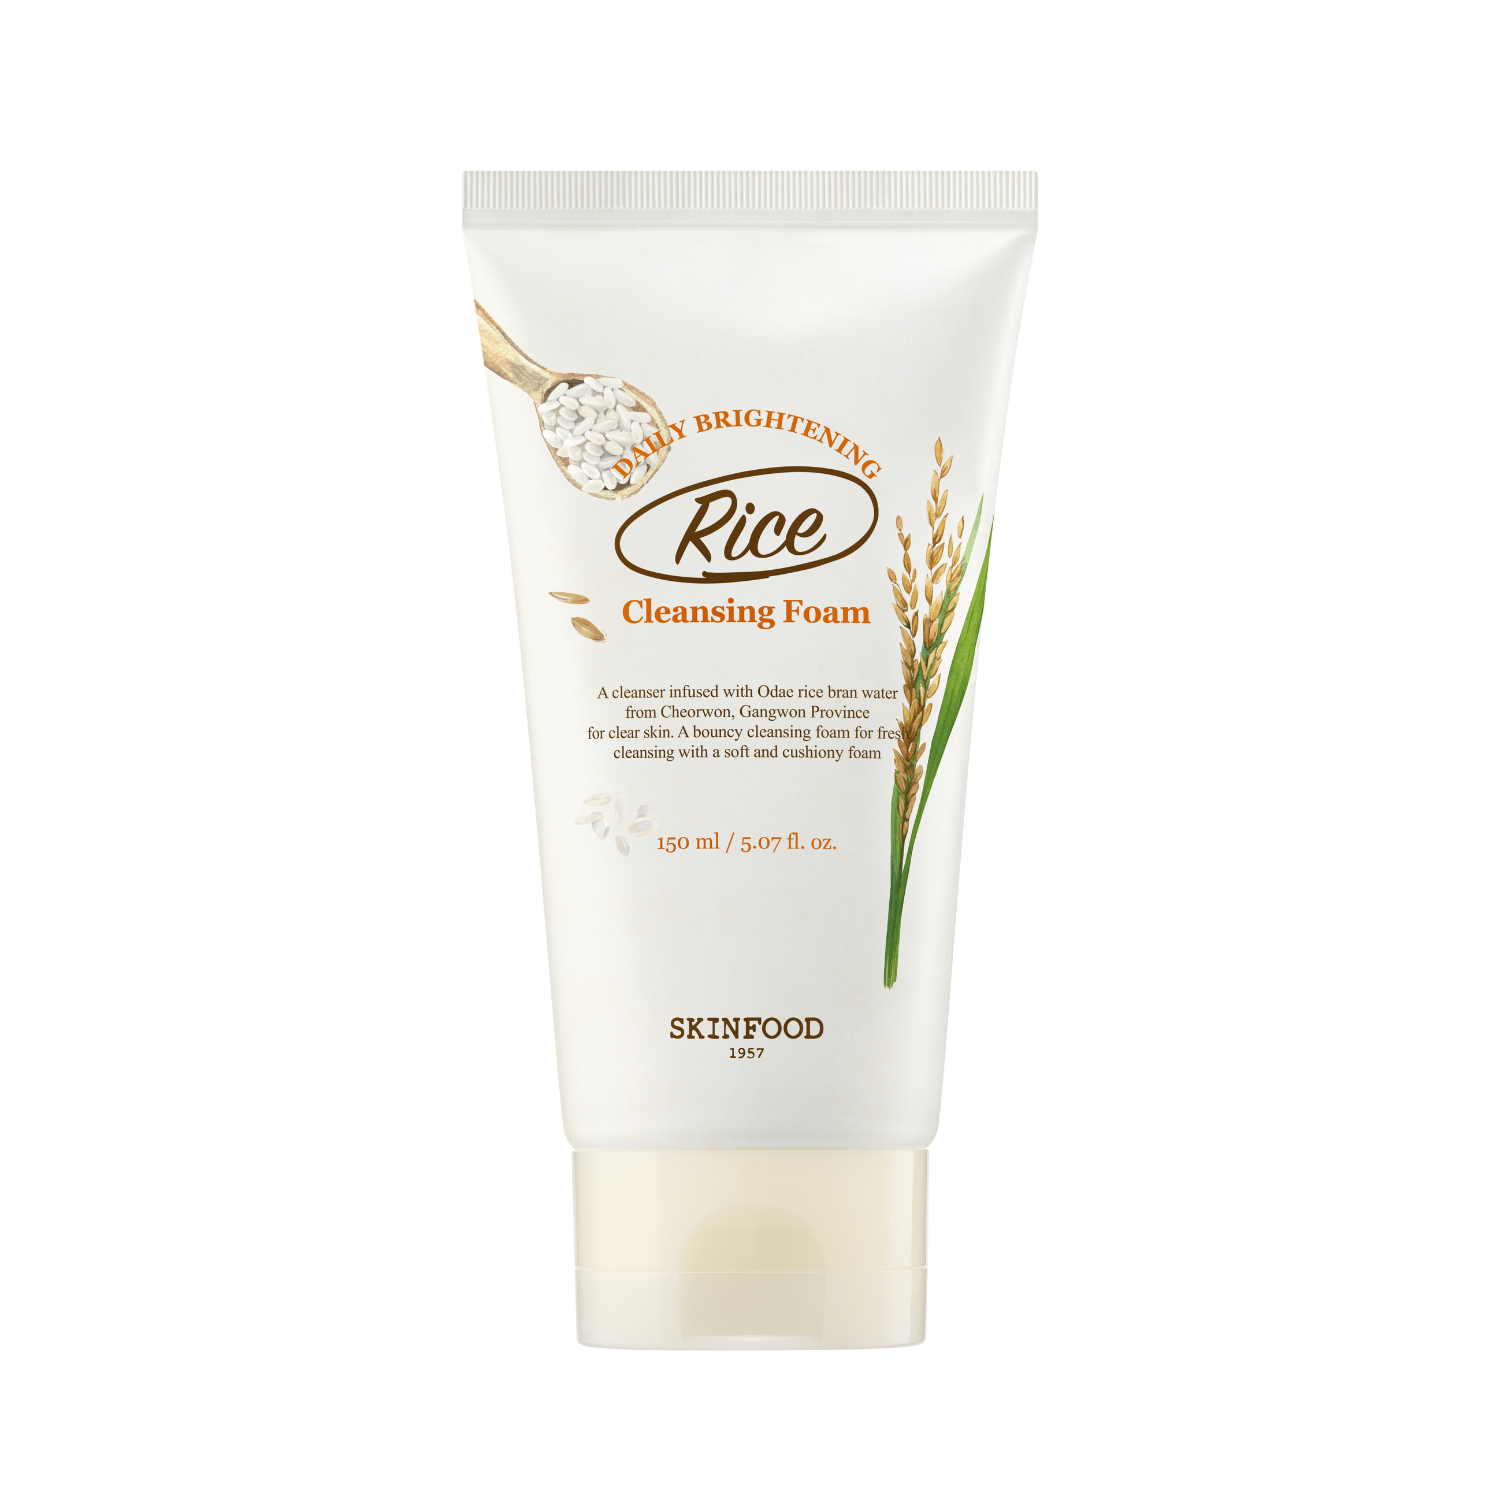 Rice Daily Brightening Cleansing Foam